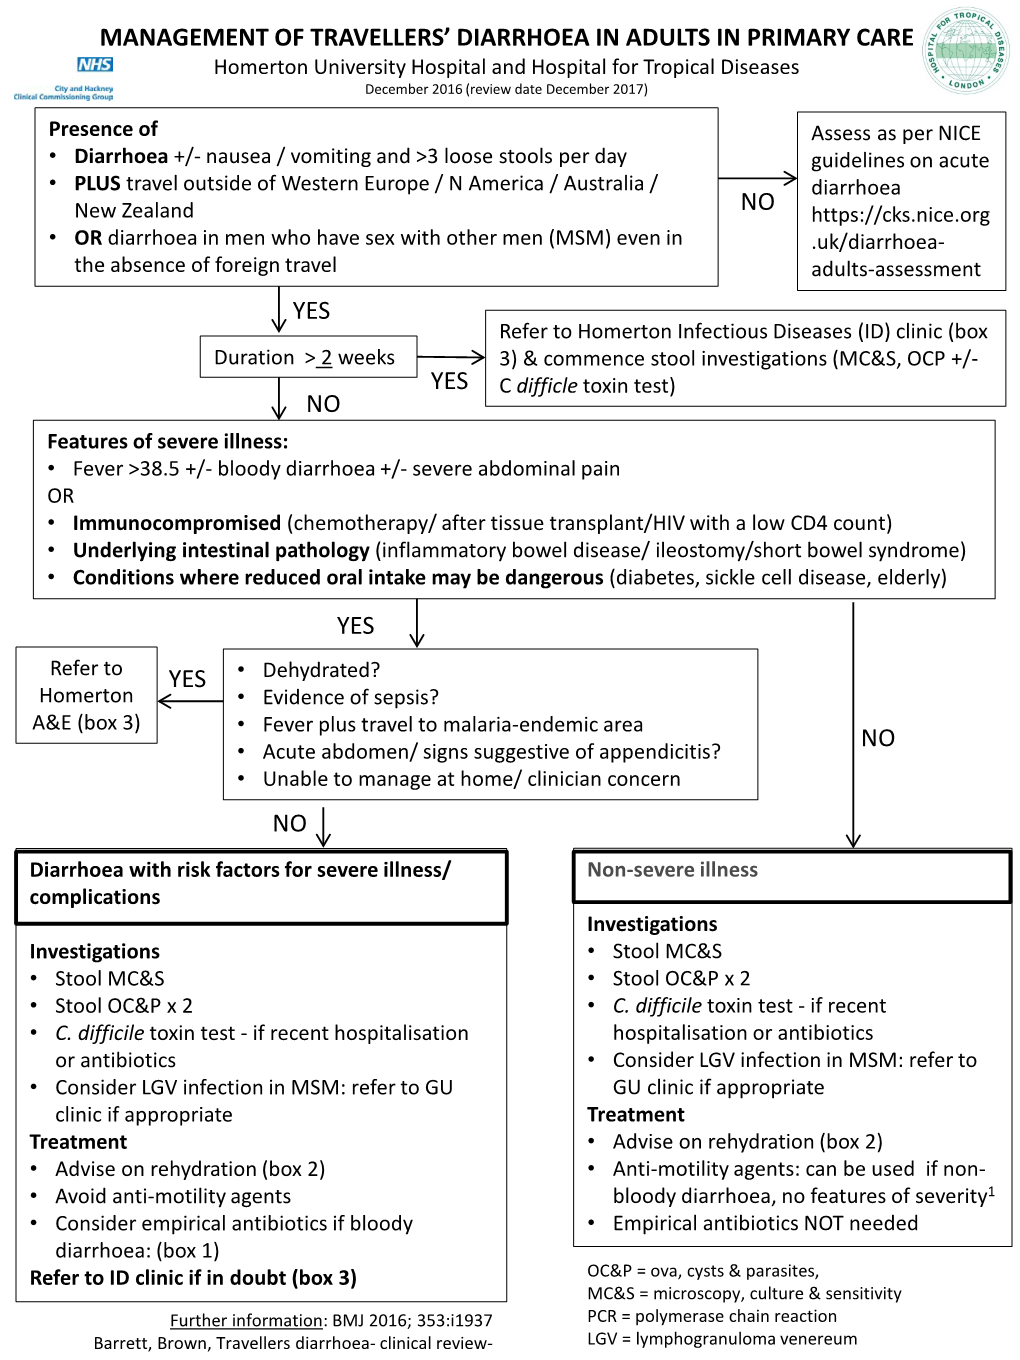 Management of Travellers' Diarrhoea in Adults In